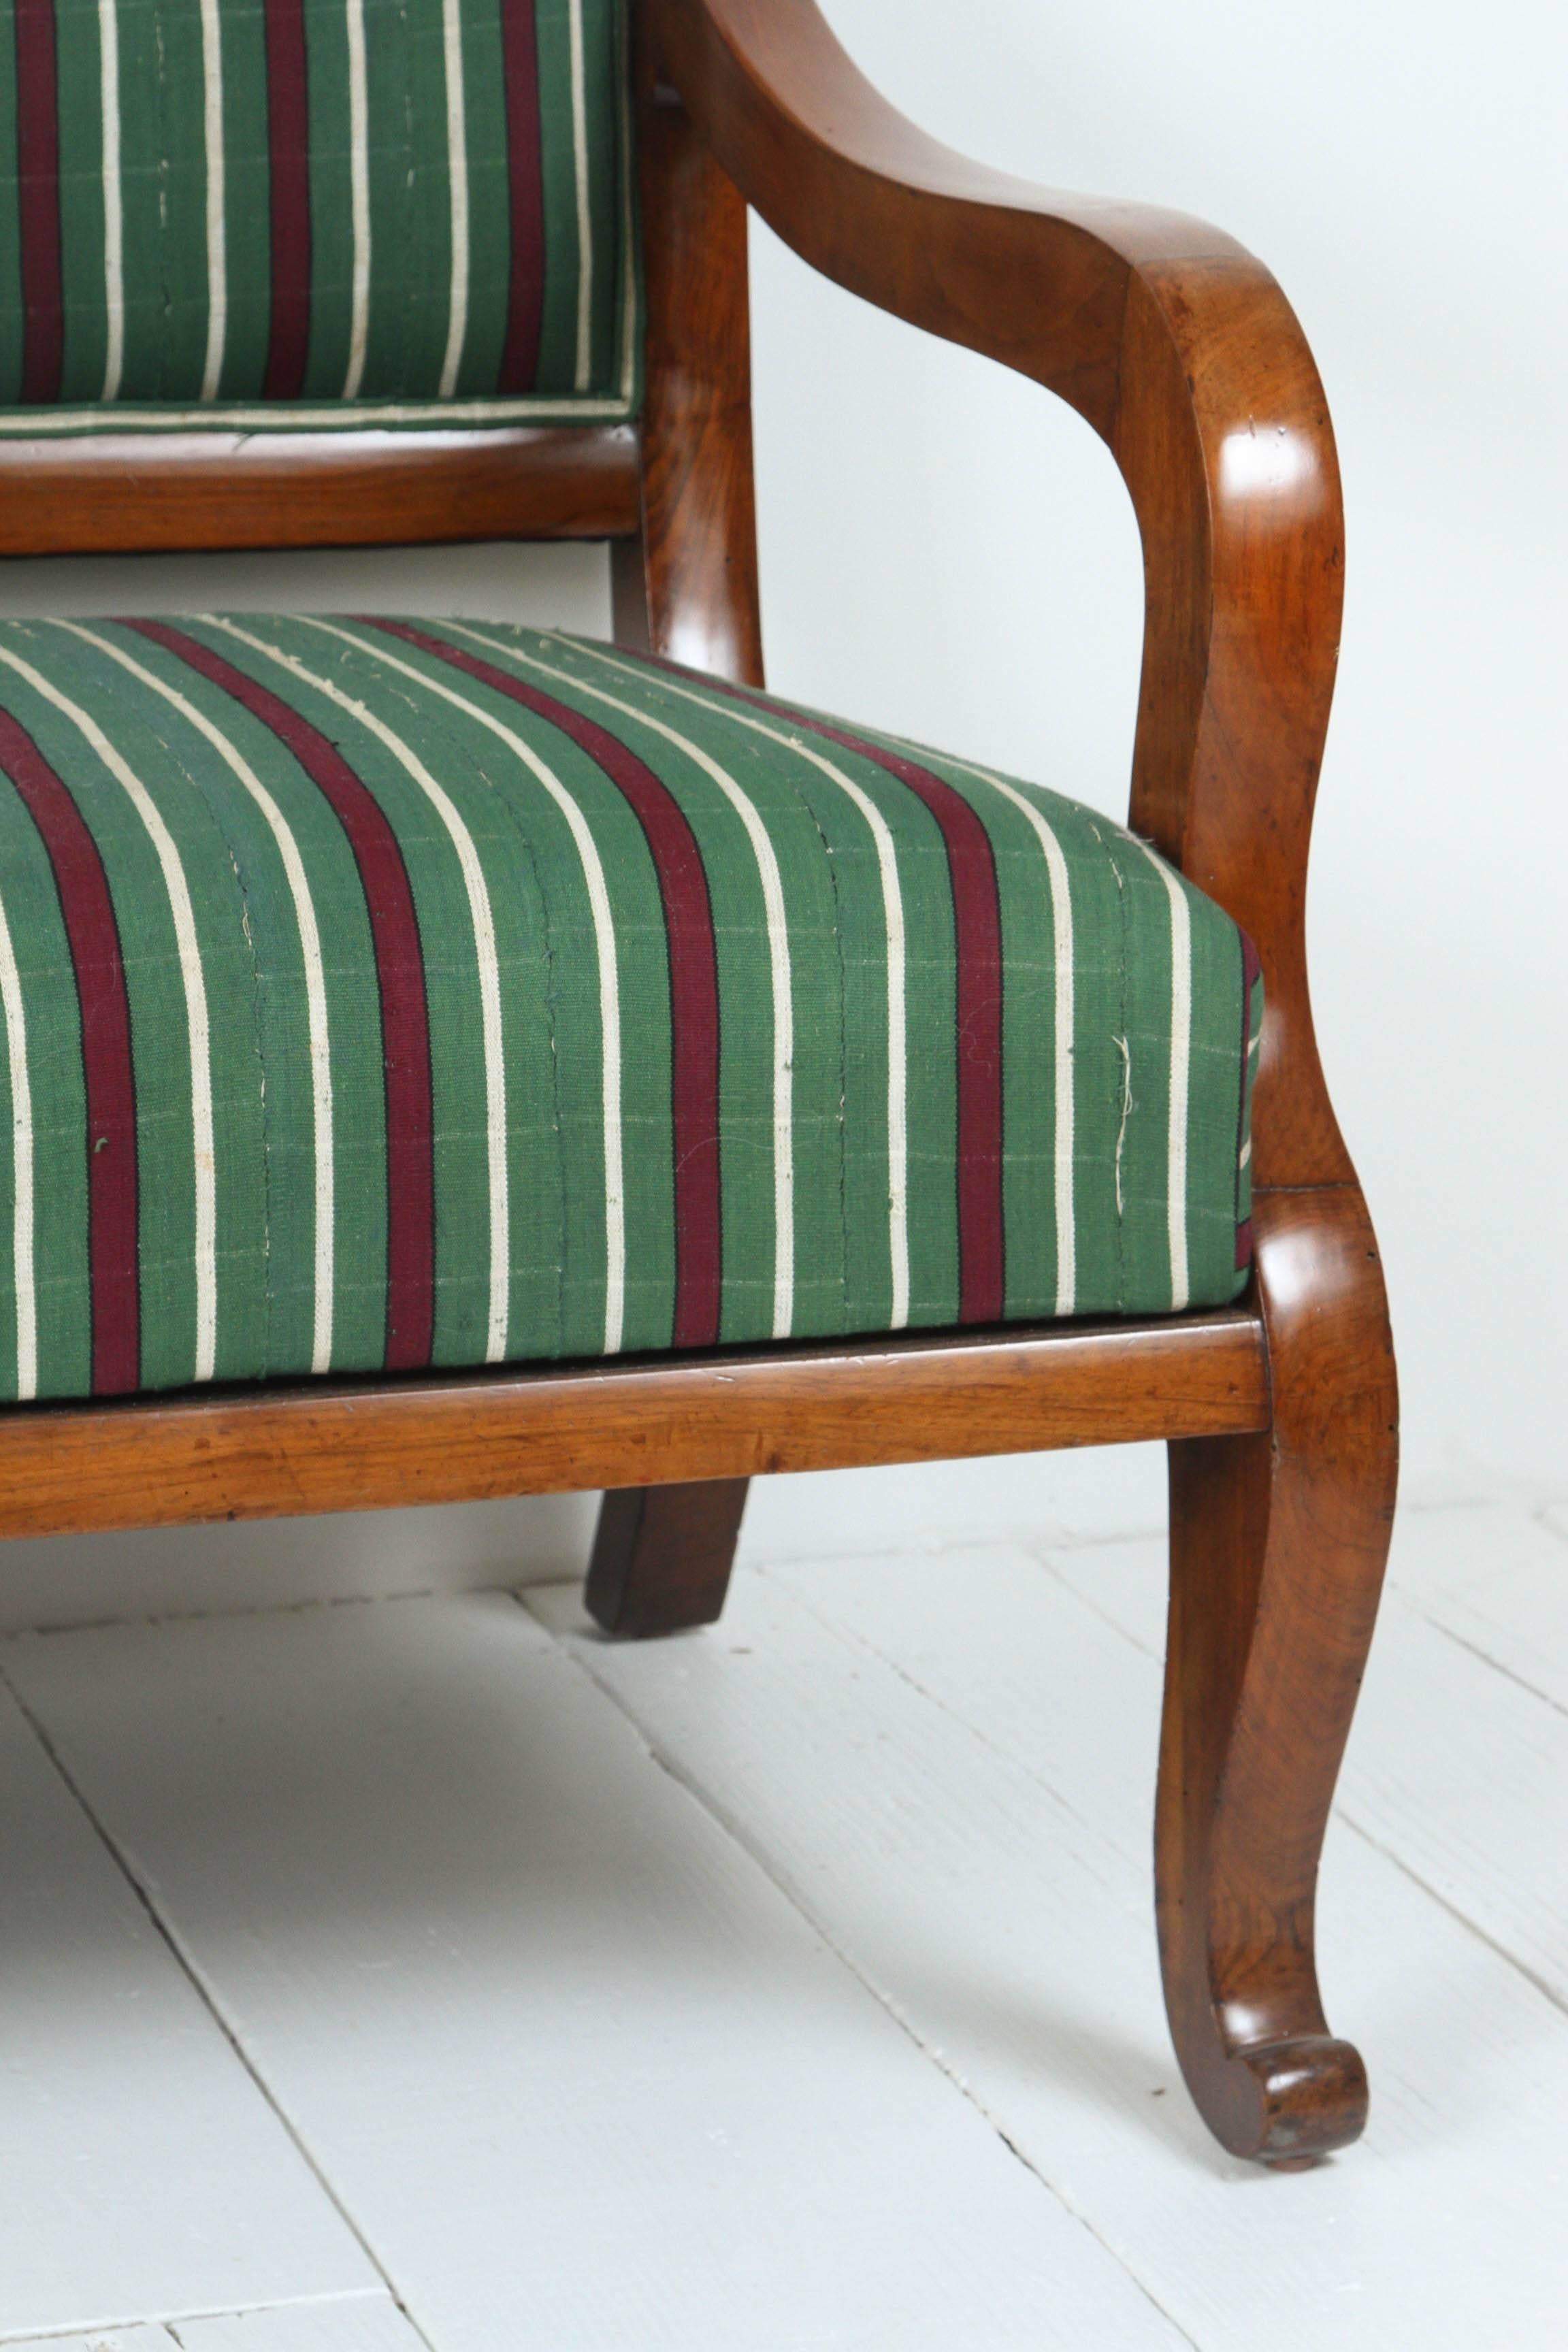 Vintage Italian wood framed bench with curved legs upholstered in vintage African striped fabric.